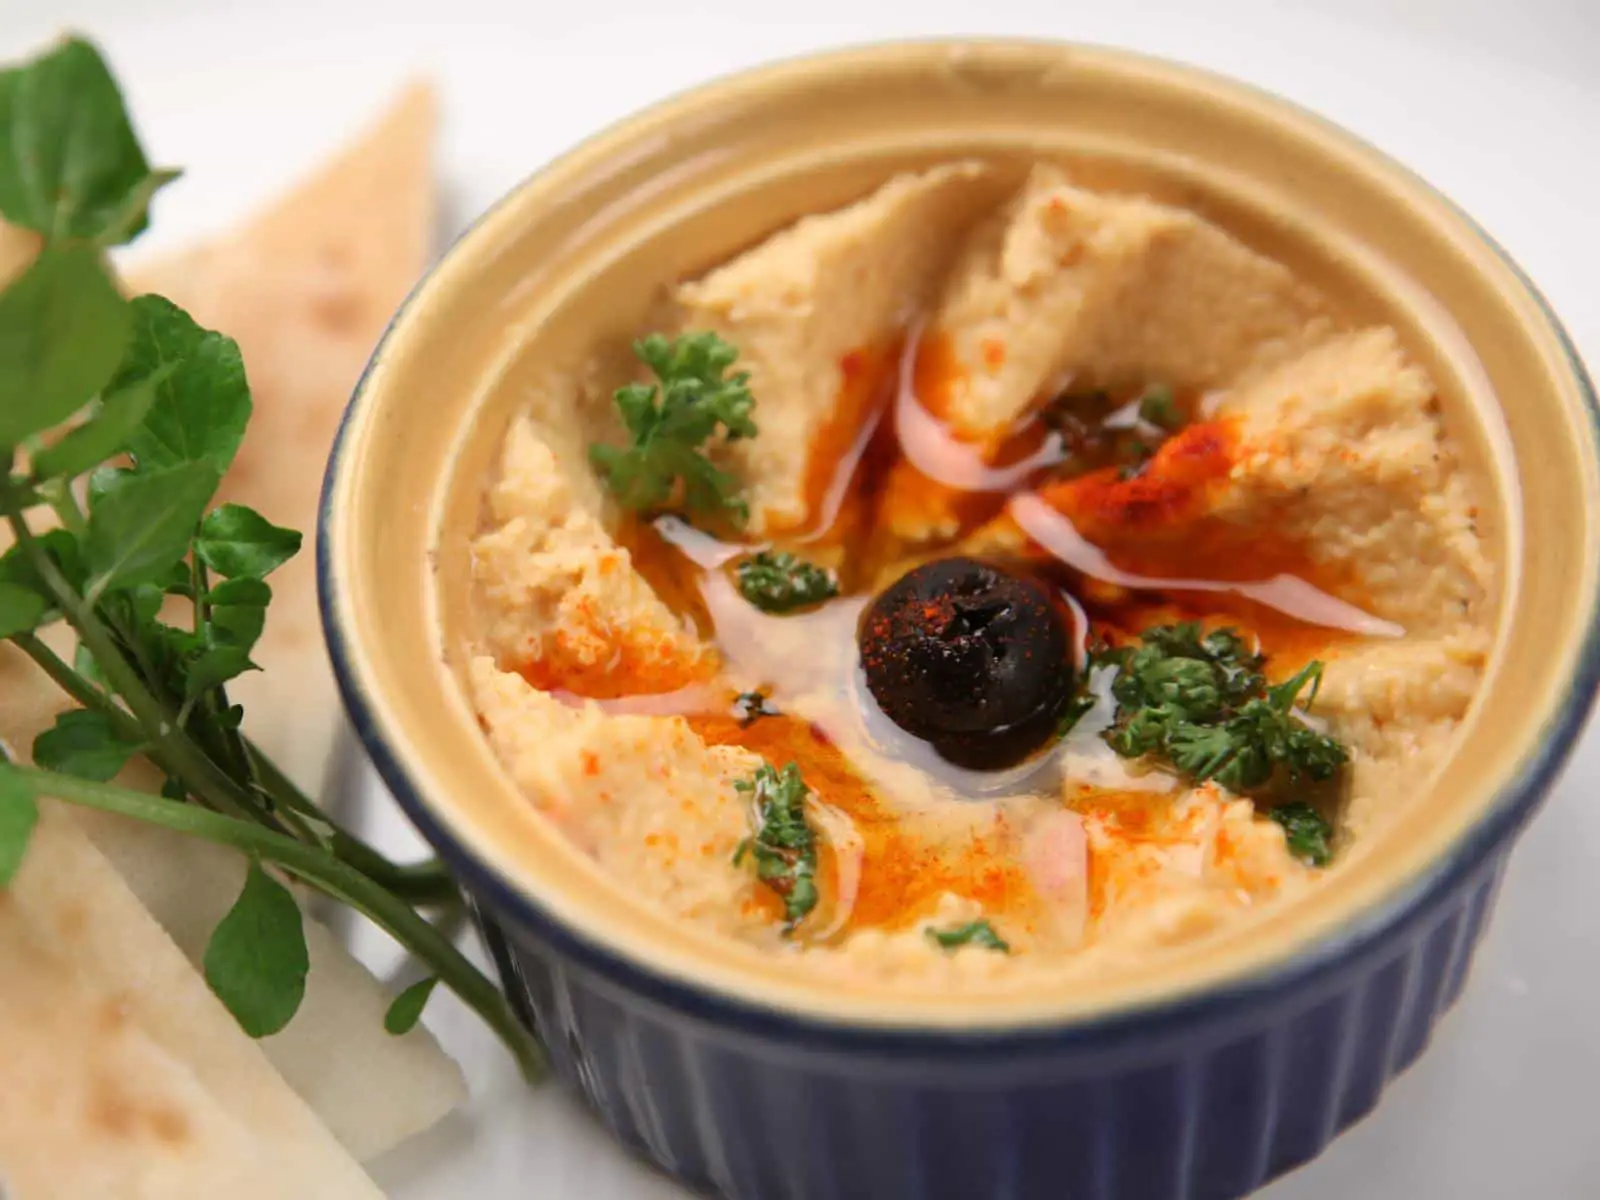 How Long Can Hummus Sit Out?